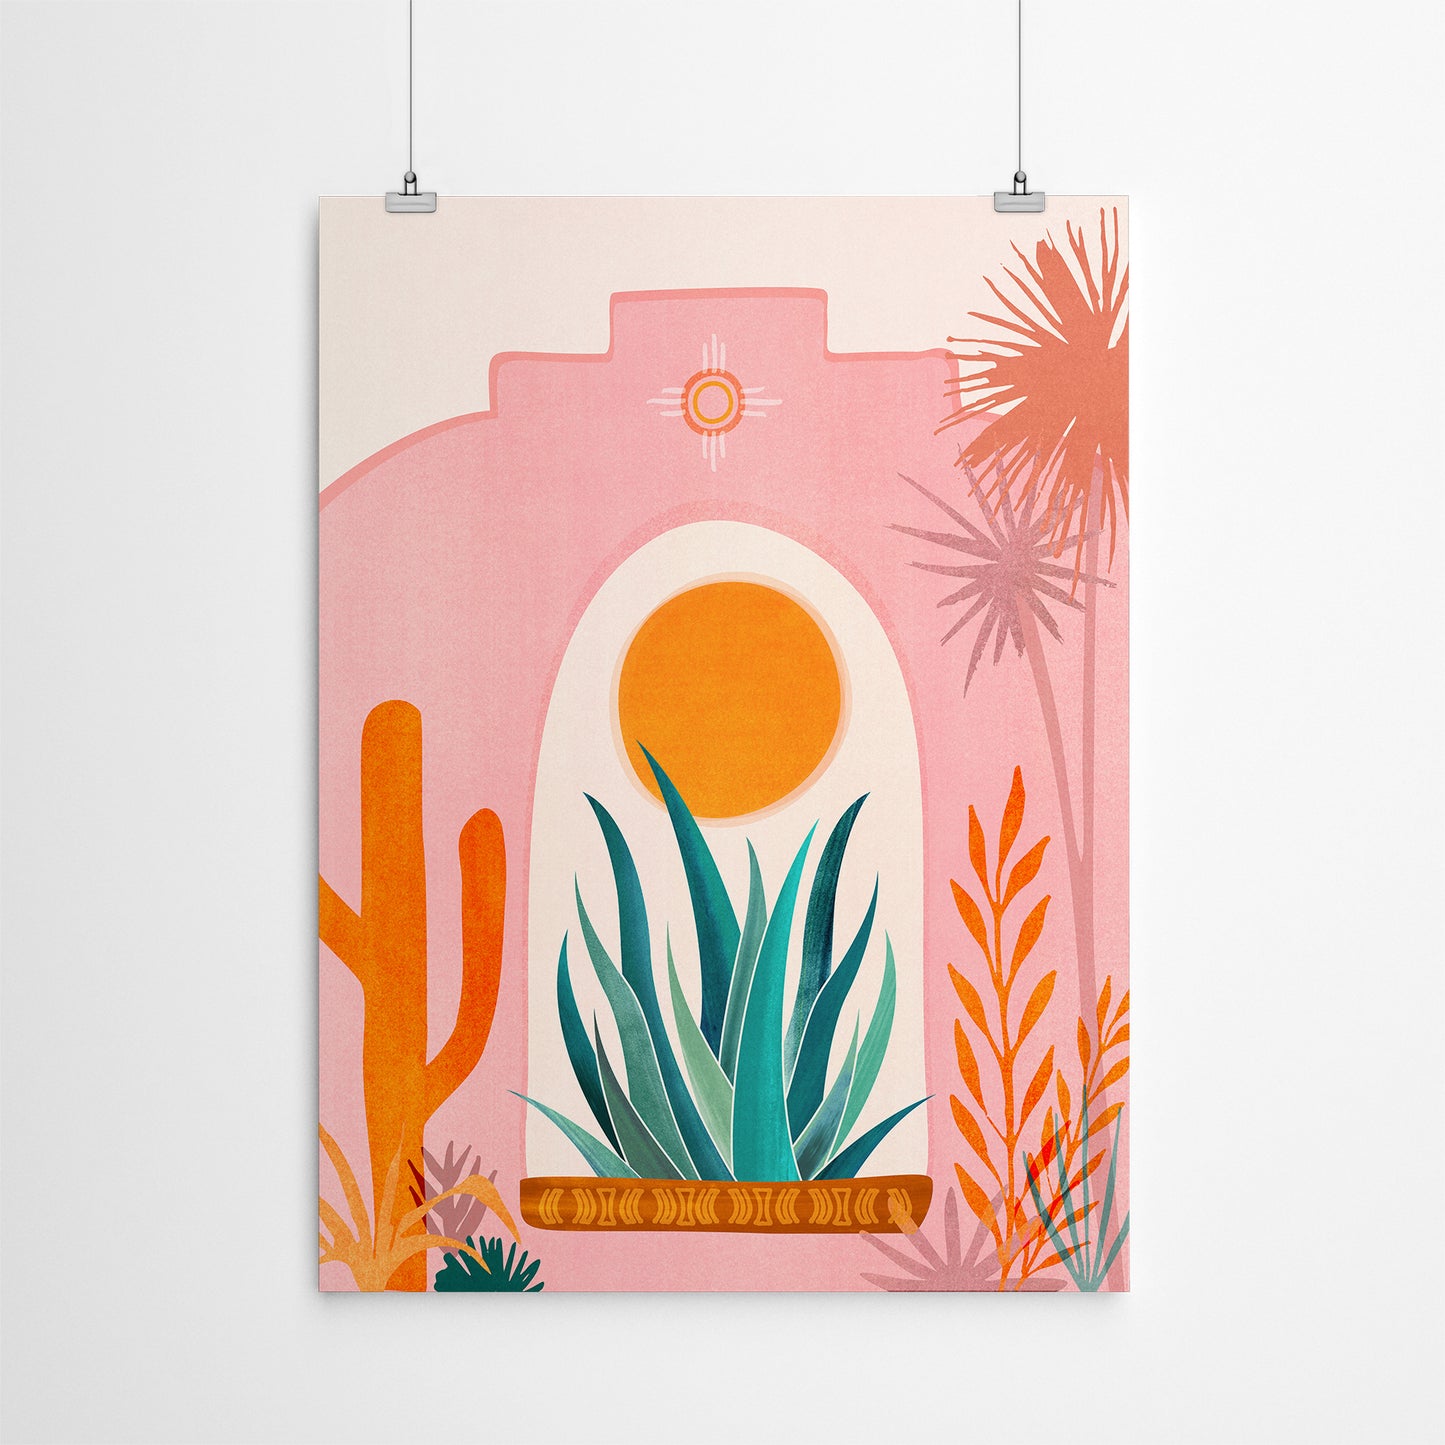 A New Day Begins by Modern Tropical - Art Print - Americanflat